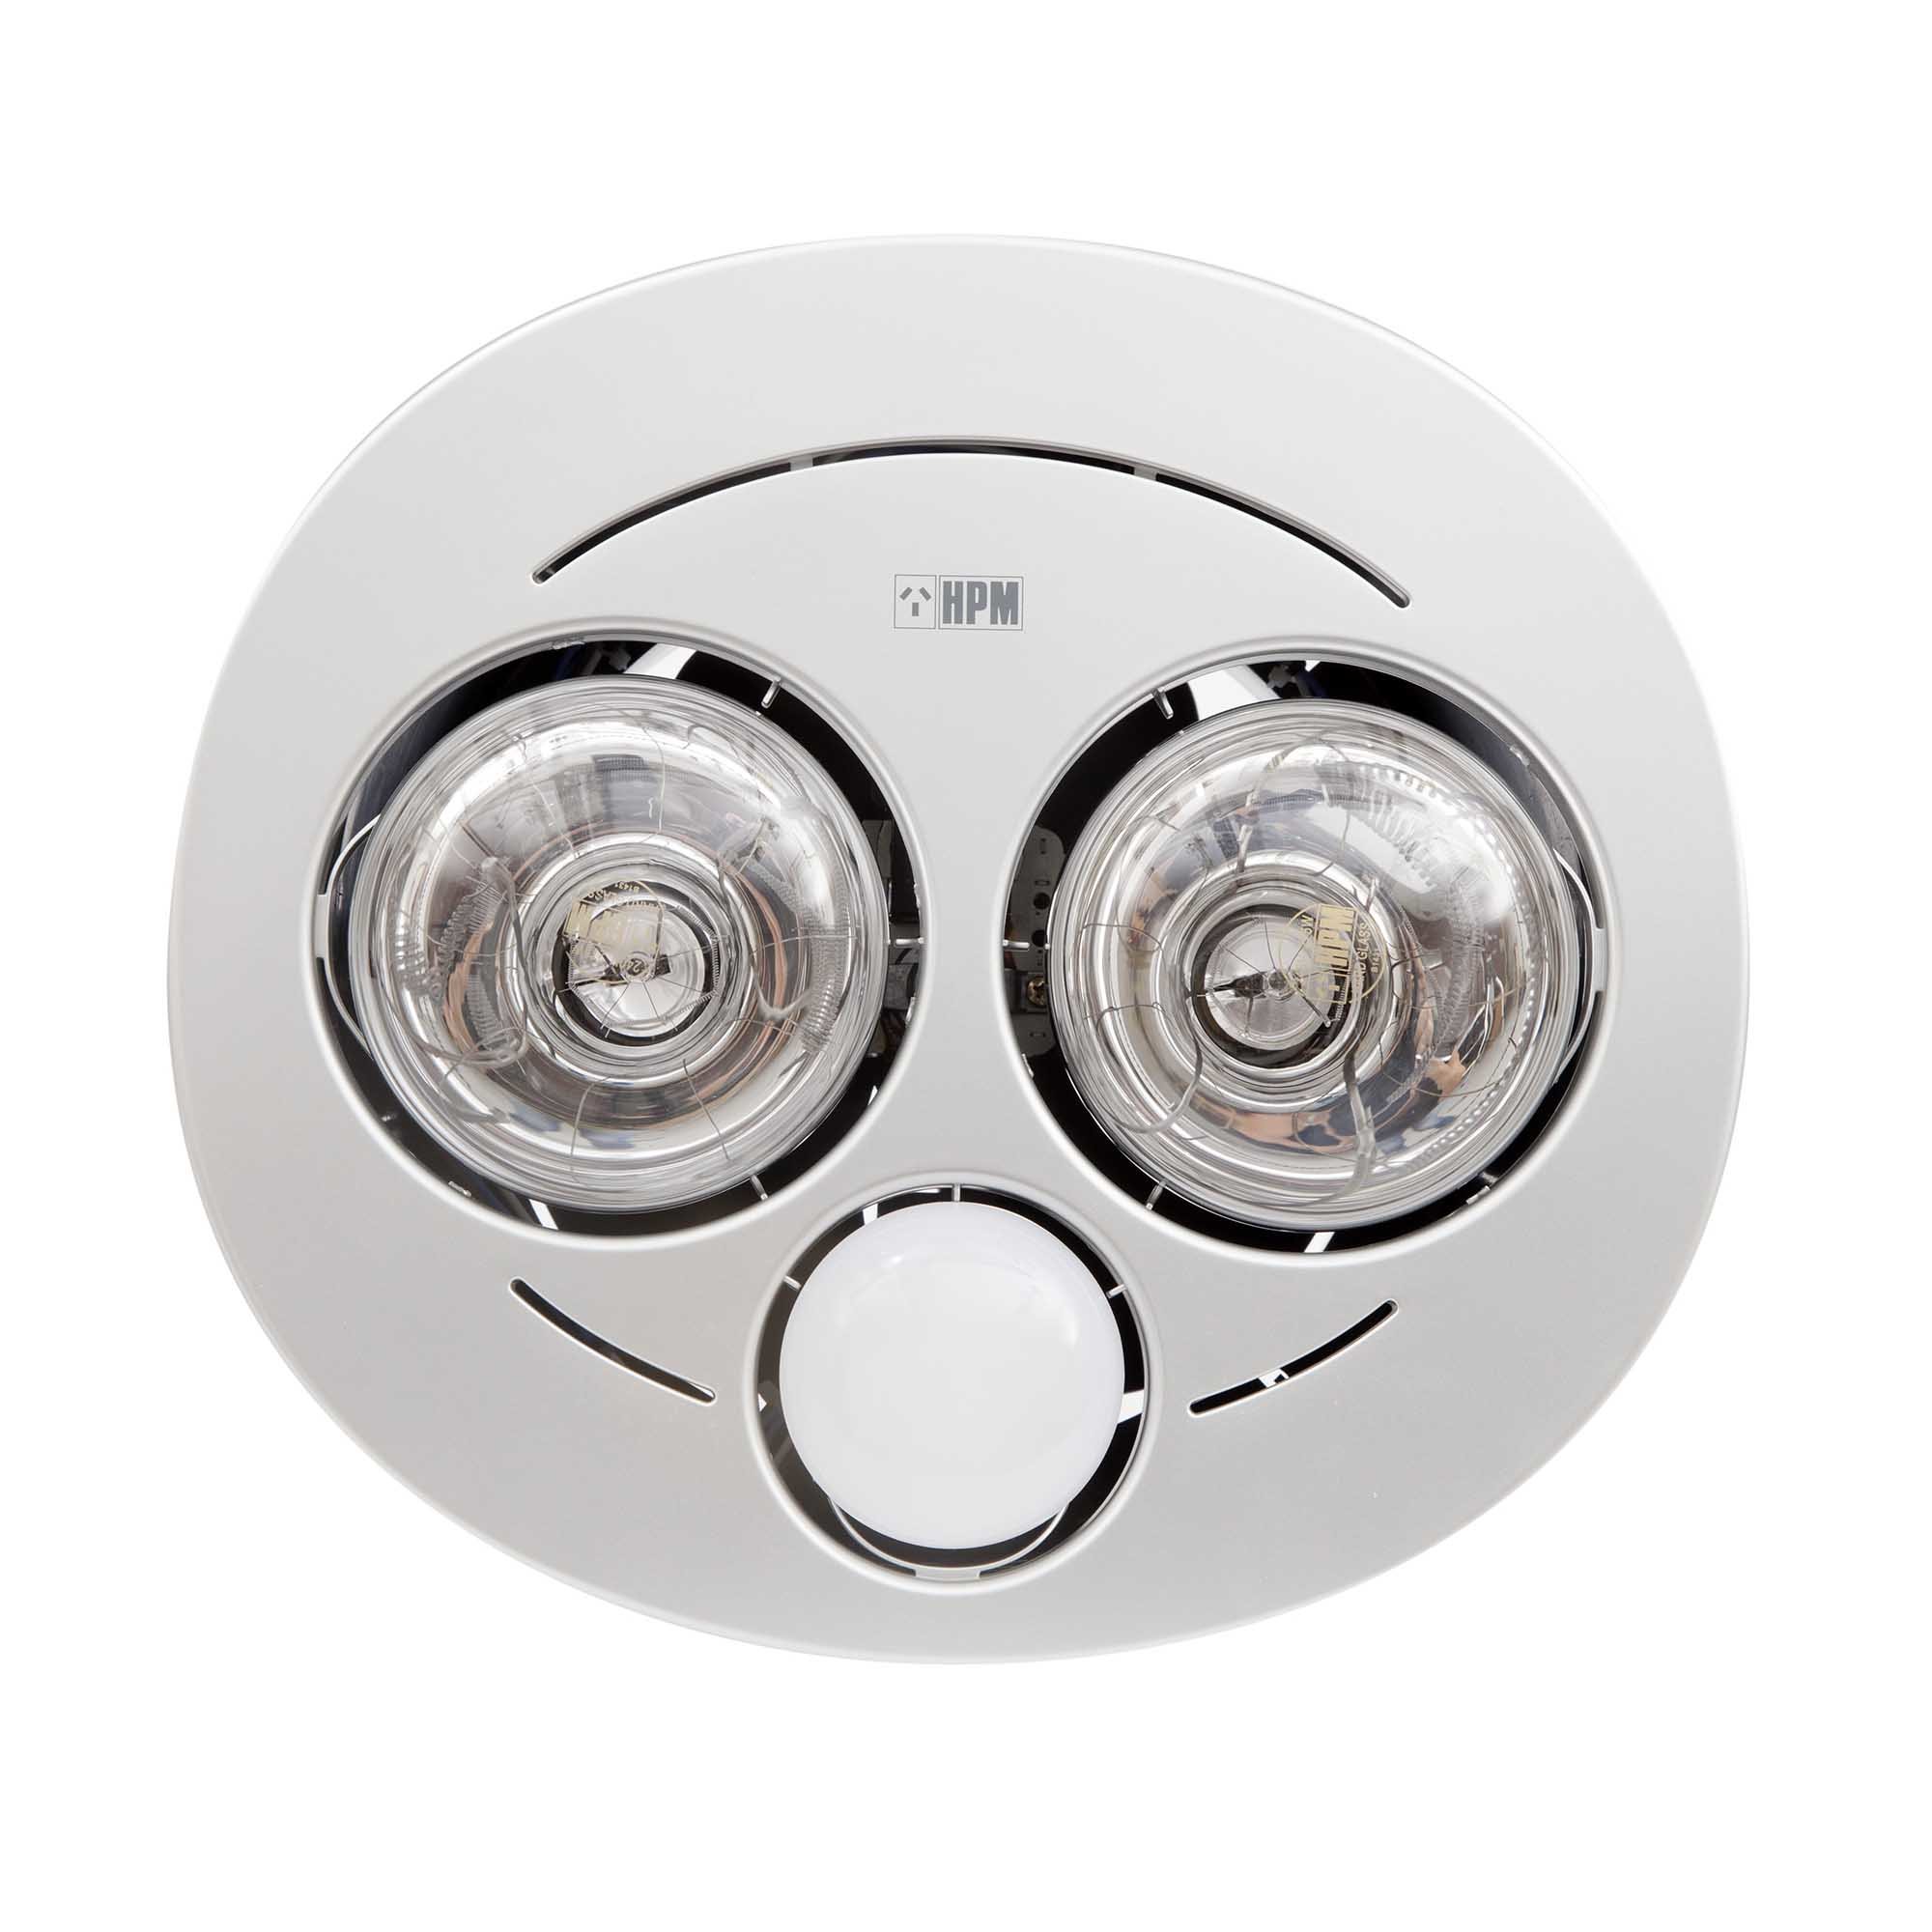 Ceiling Light And Heater